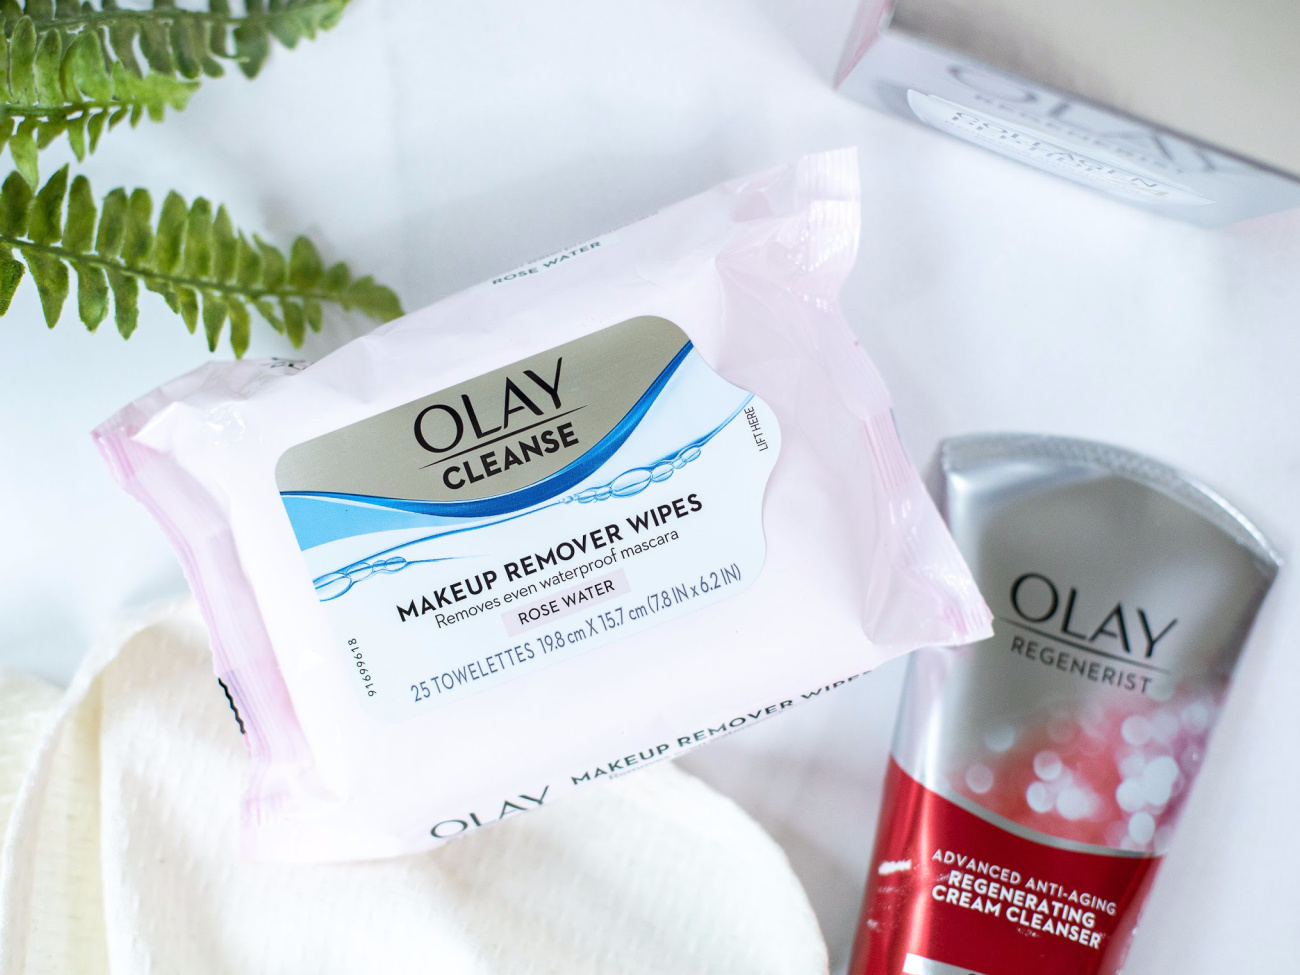 Olay Cleansing Wipes As Low As $2.99 At Publix